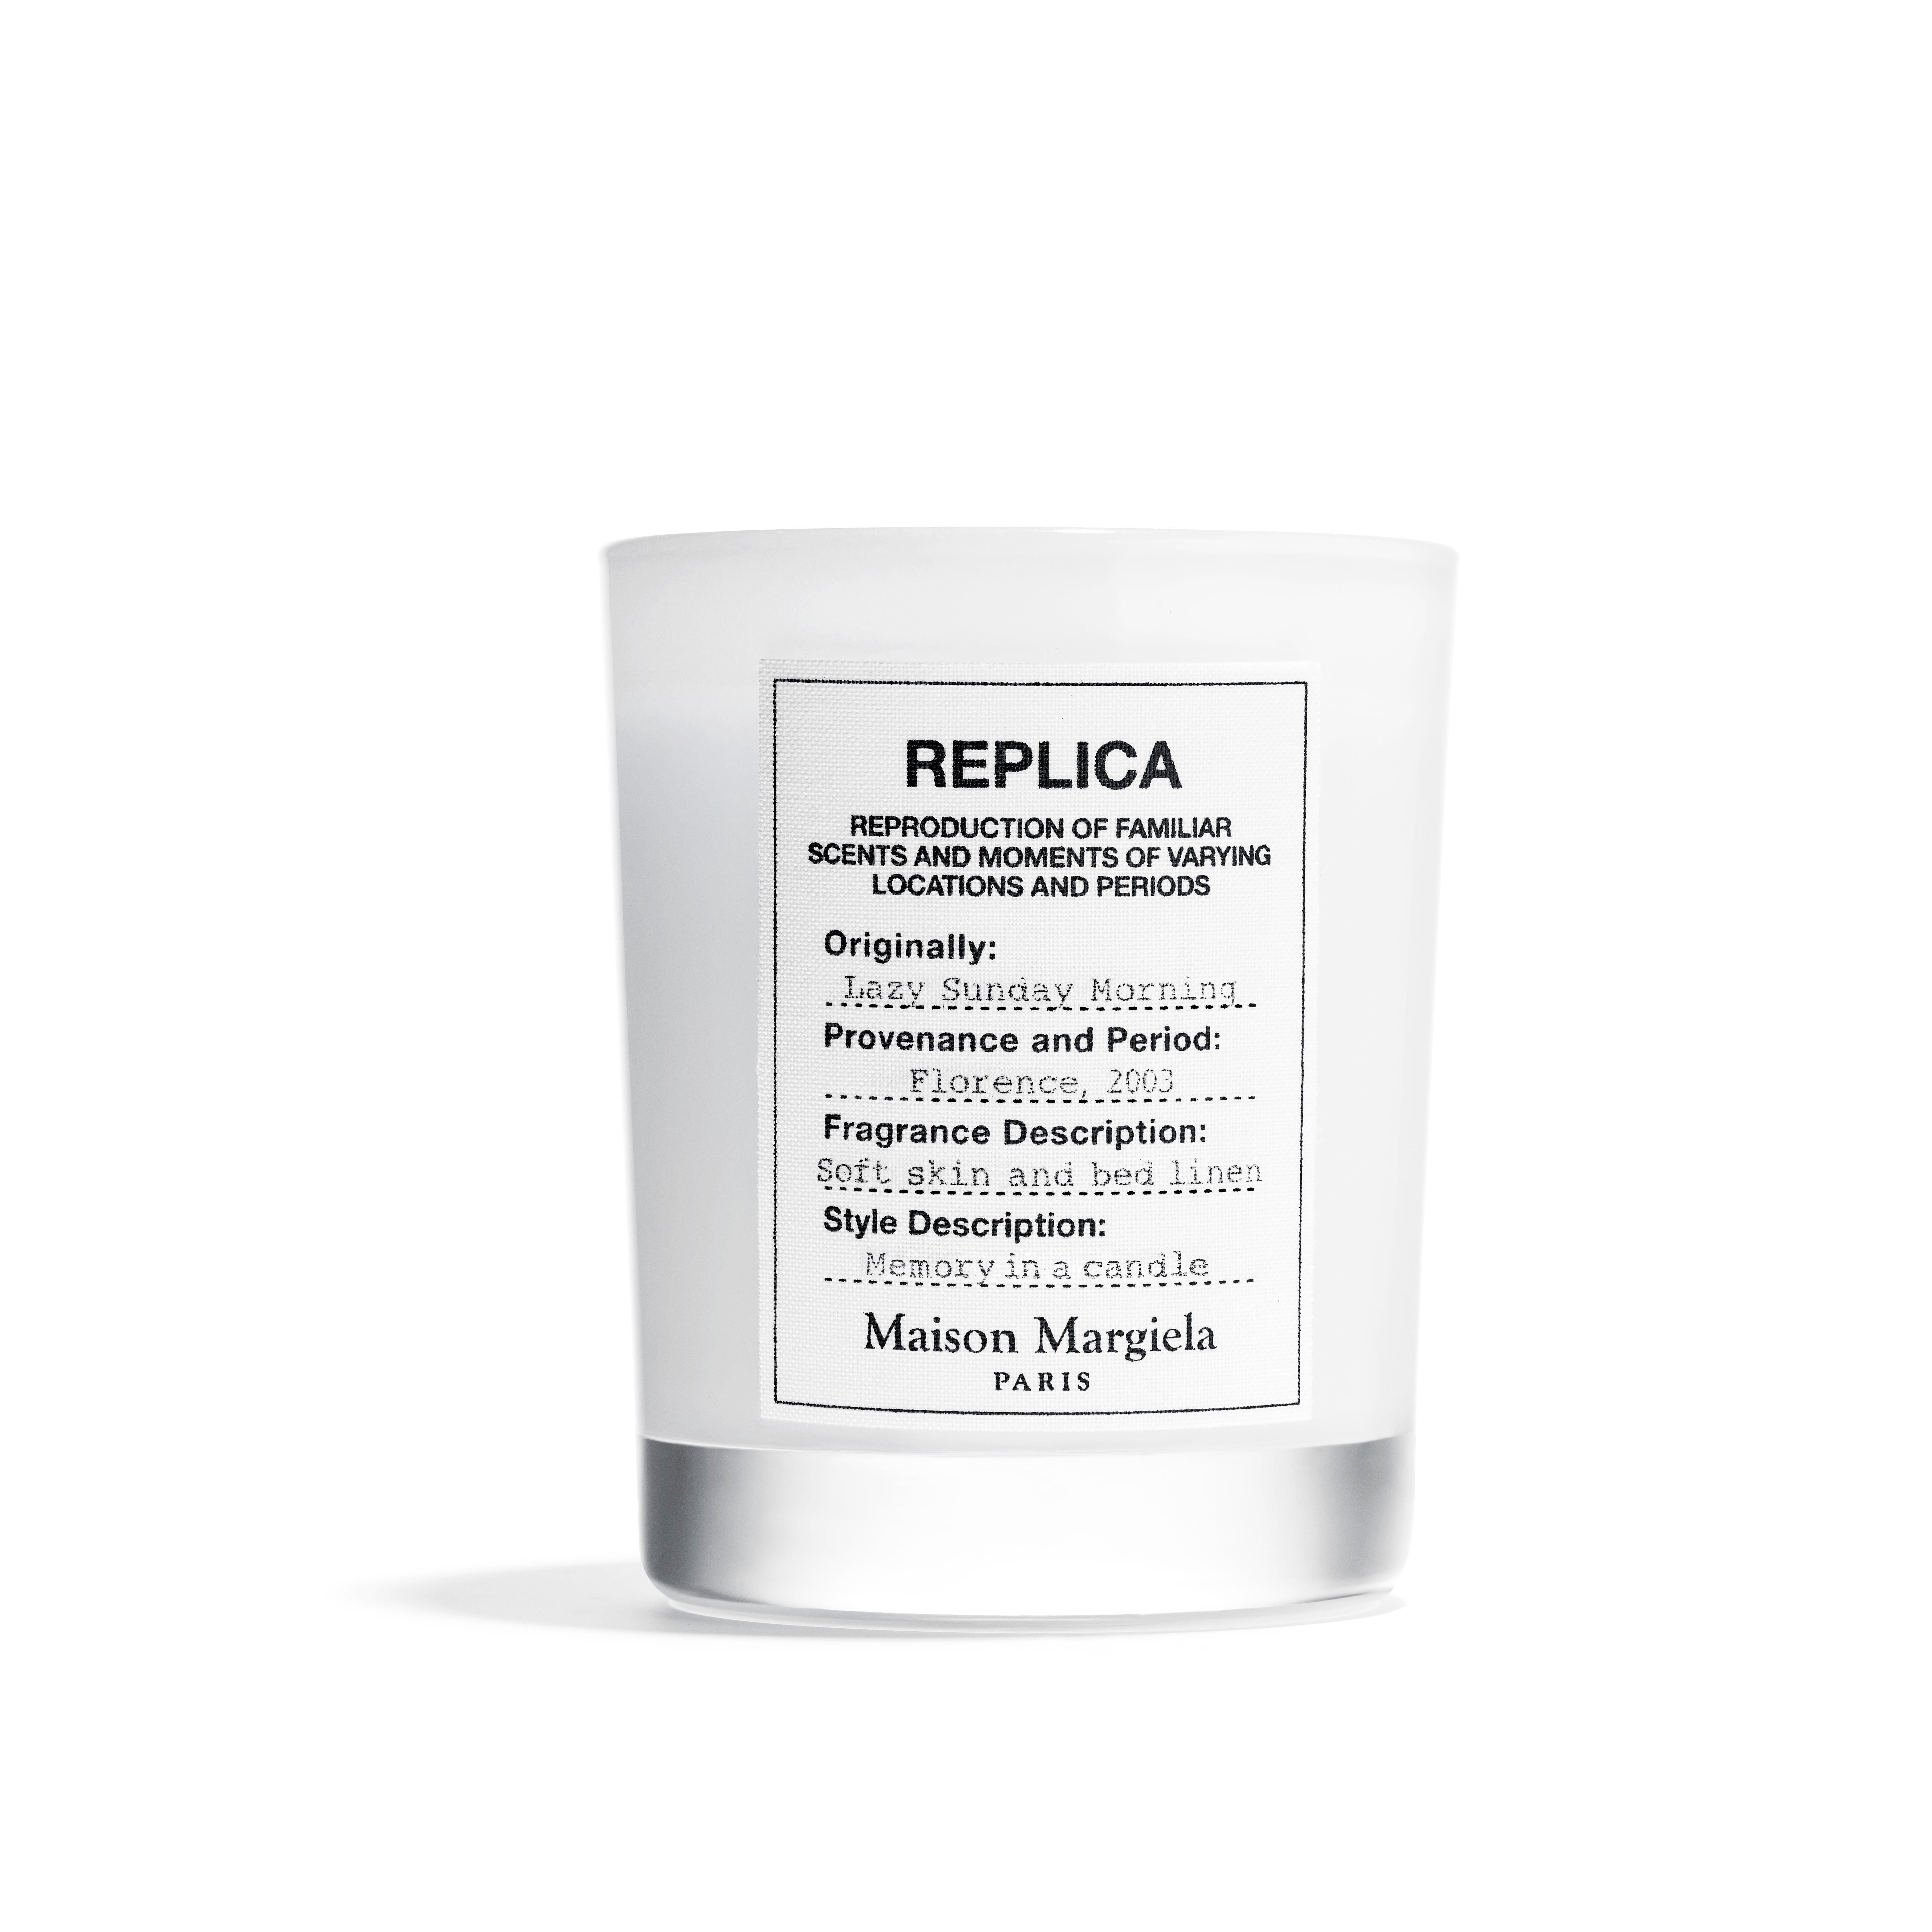 Replica Lazy Sunday Morning Candle | Space NK - UK